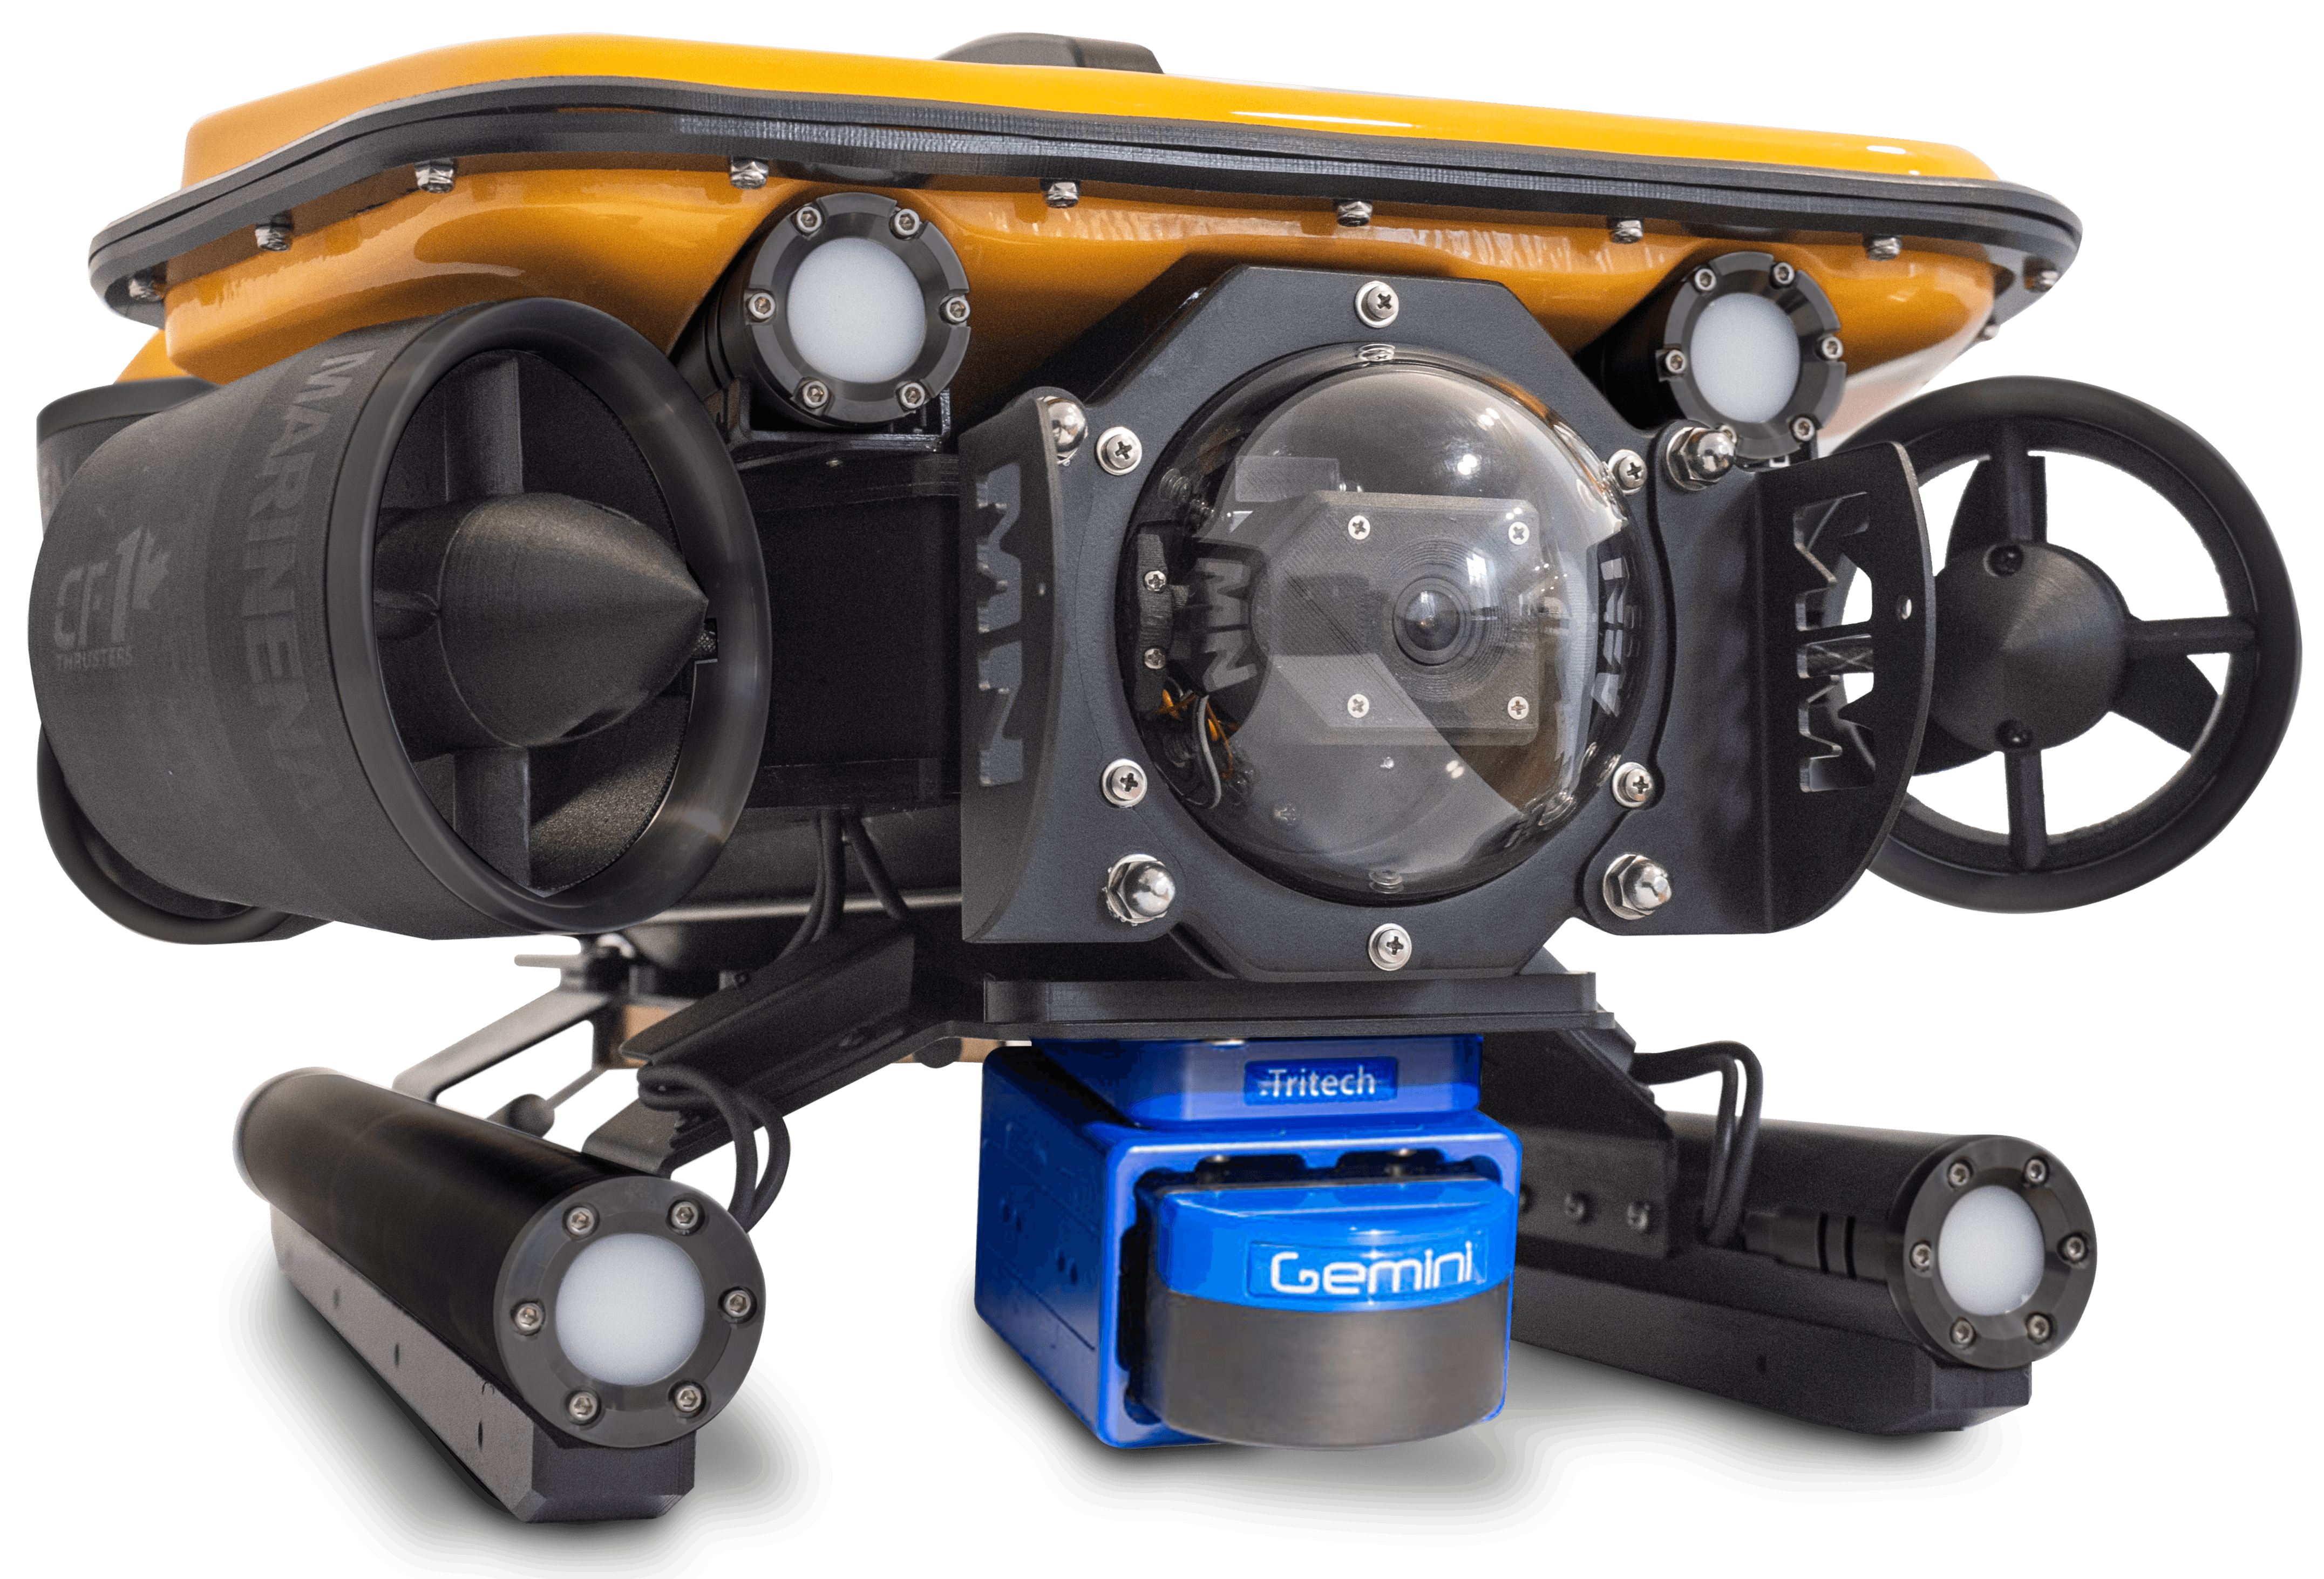 MarineNav ROV systems can be accessorized with a range of third-party manufactured sonar systems.